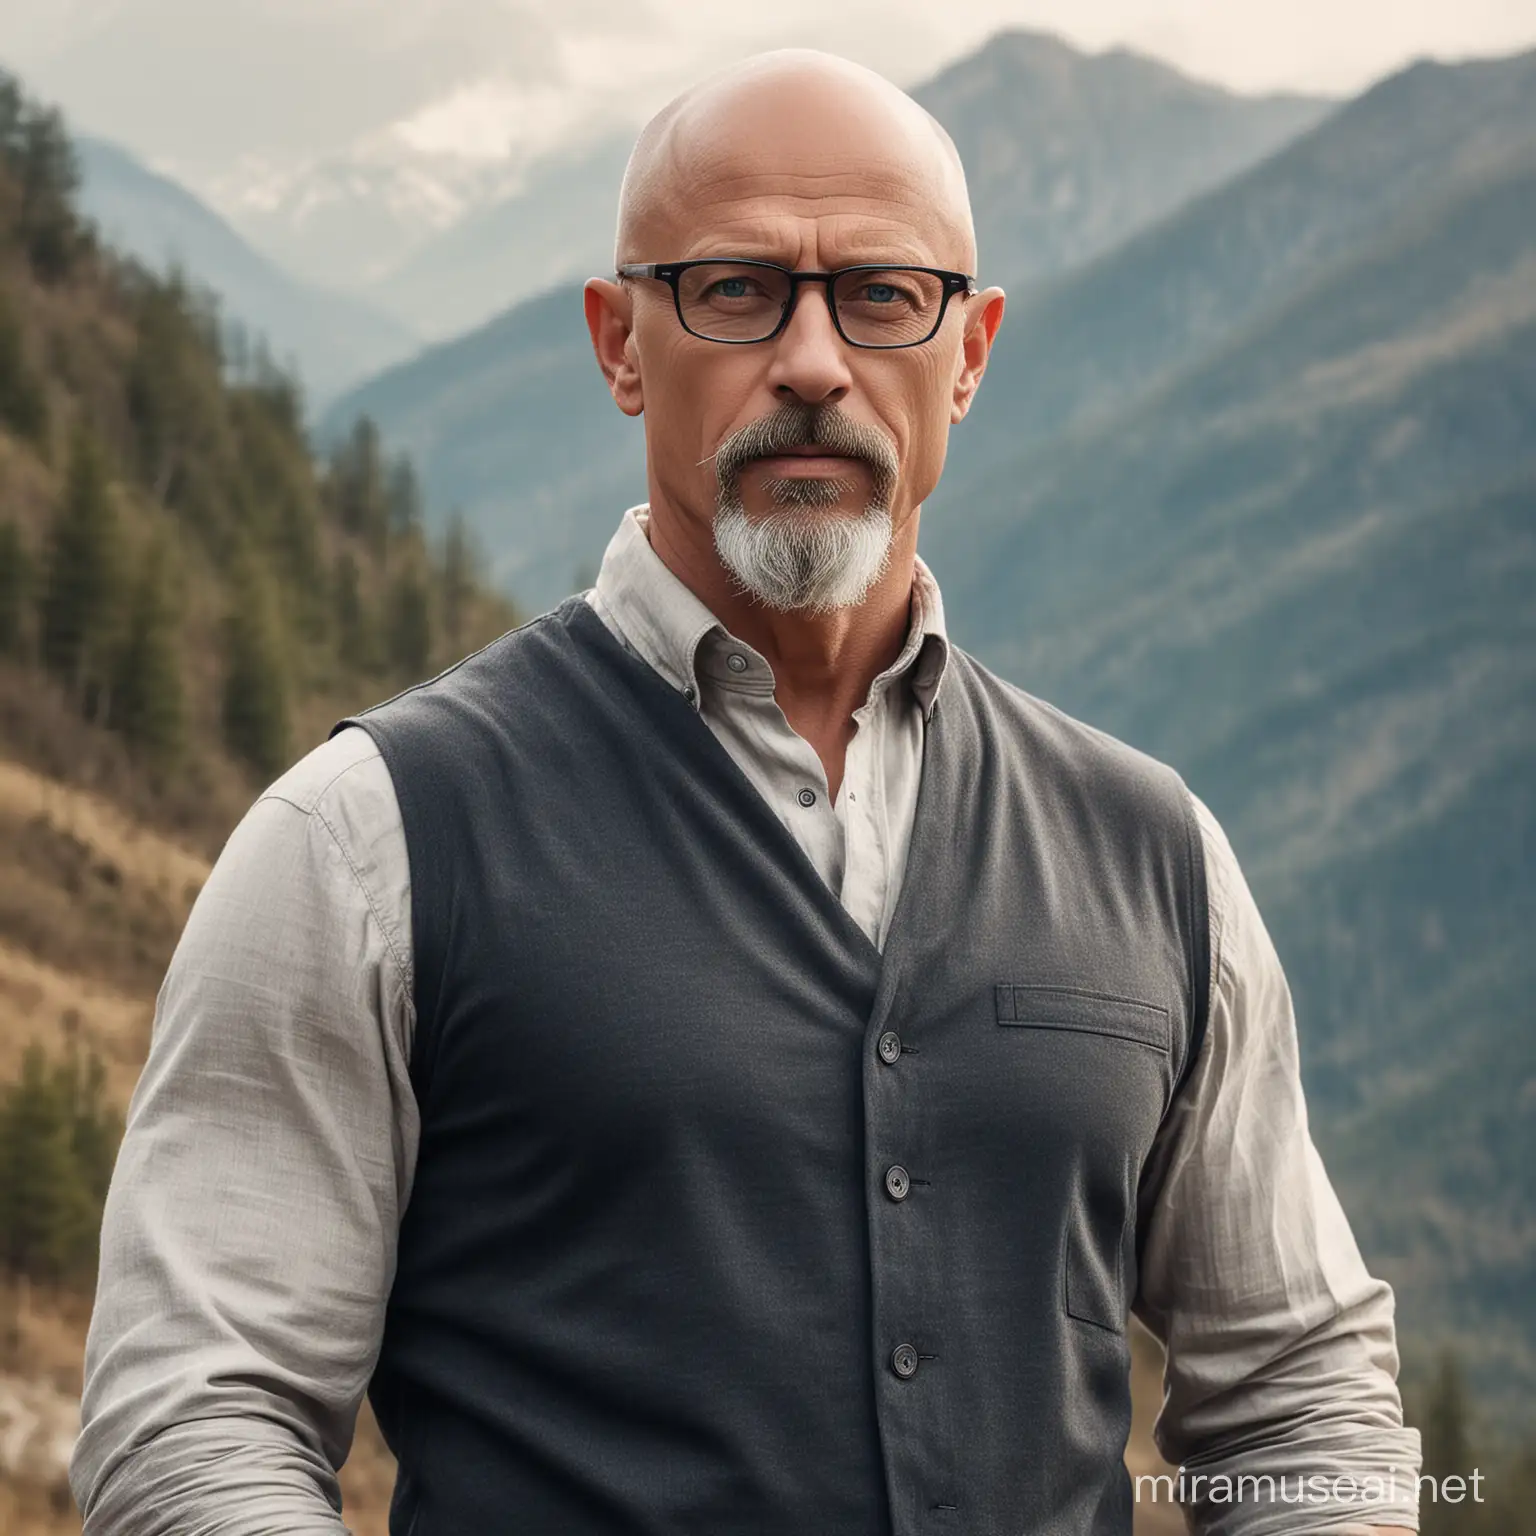 Muscular Bald Man with Stylish Glasses in Mountainous Landscape